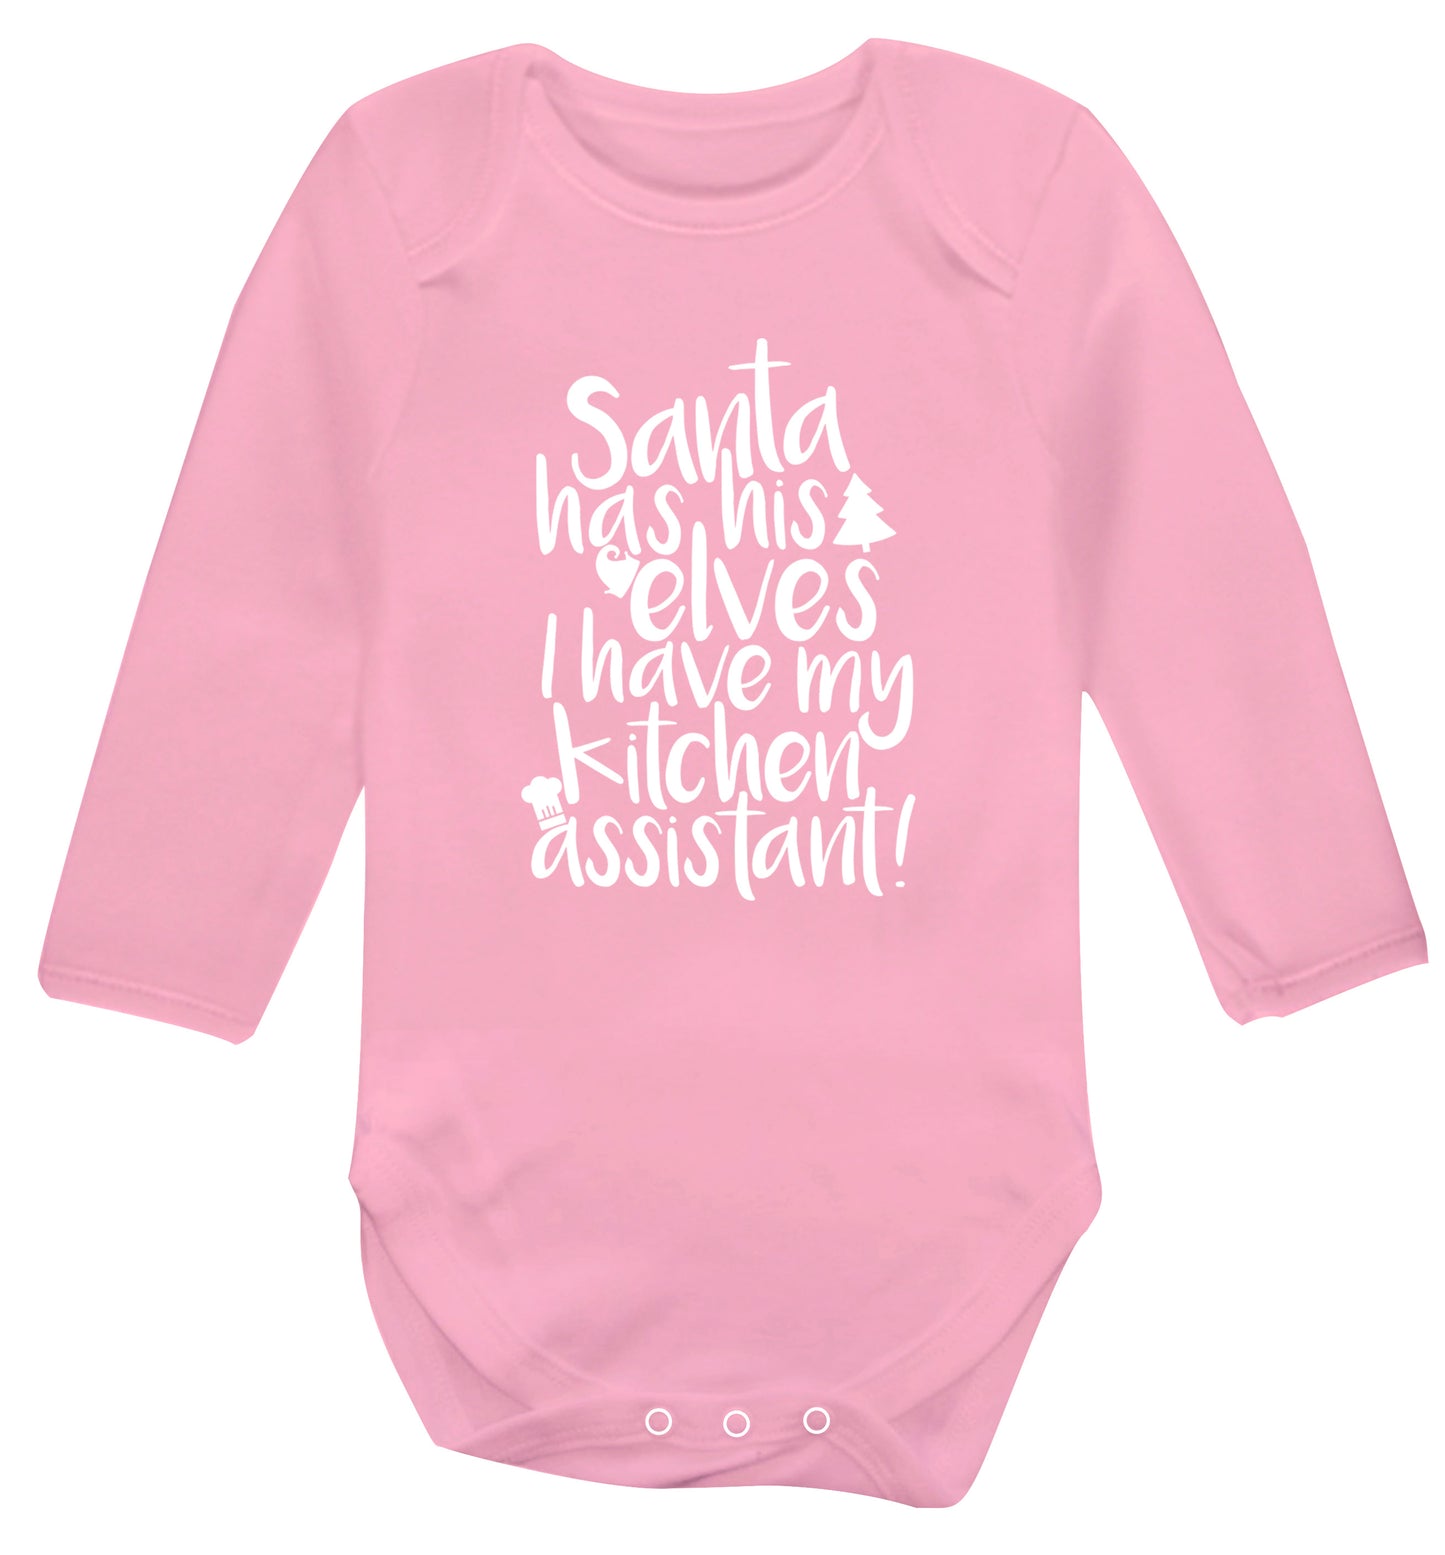 Santa has his elves I have my kitchen assistant Baby Vest long sleeved pale pink 6-12 months